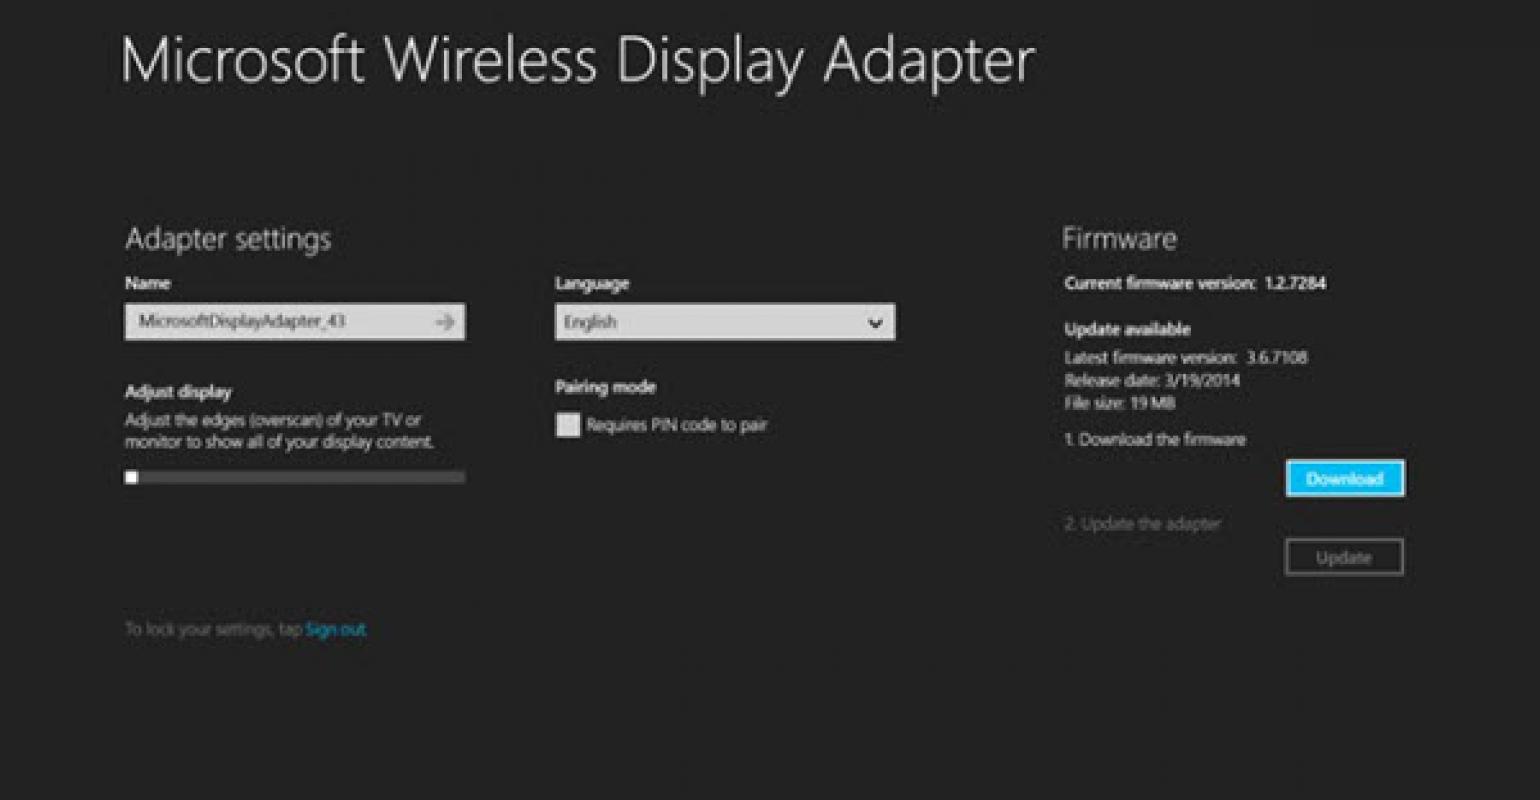 Customization and Configuration for the Microsoft Wireless Display Adapter  in the Windows 8.1 App